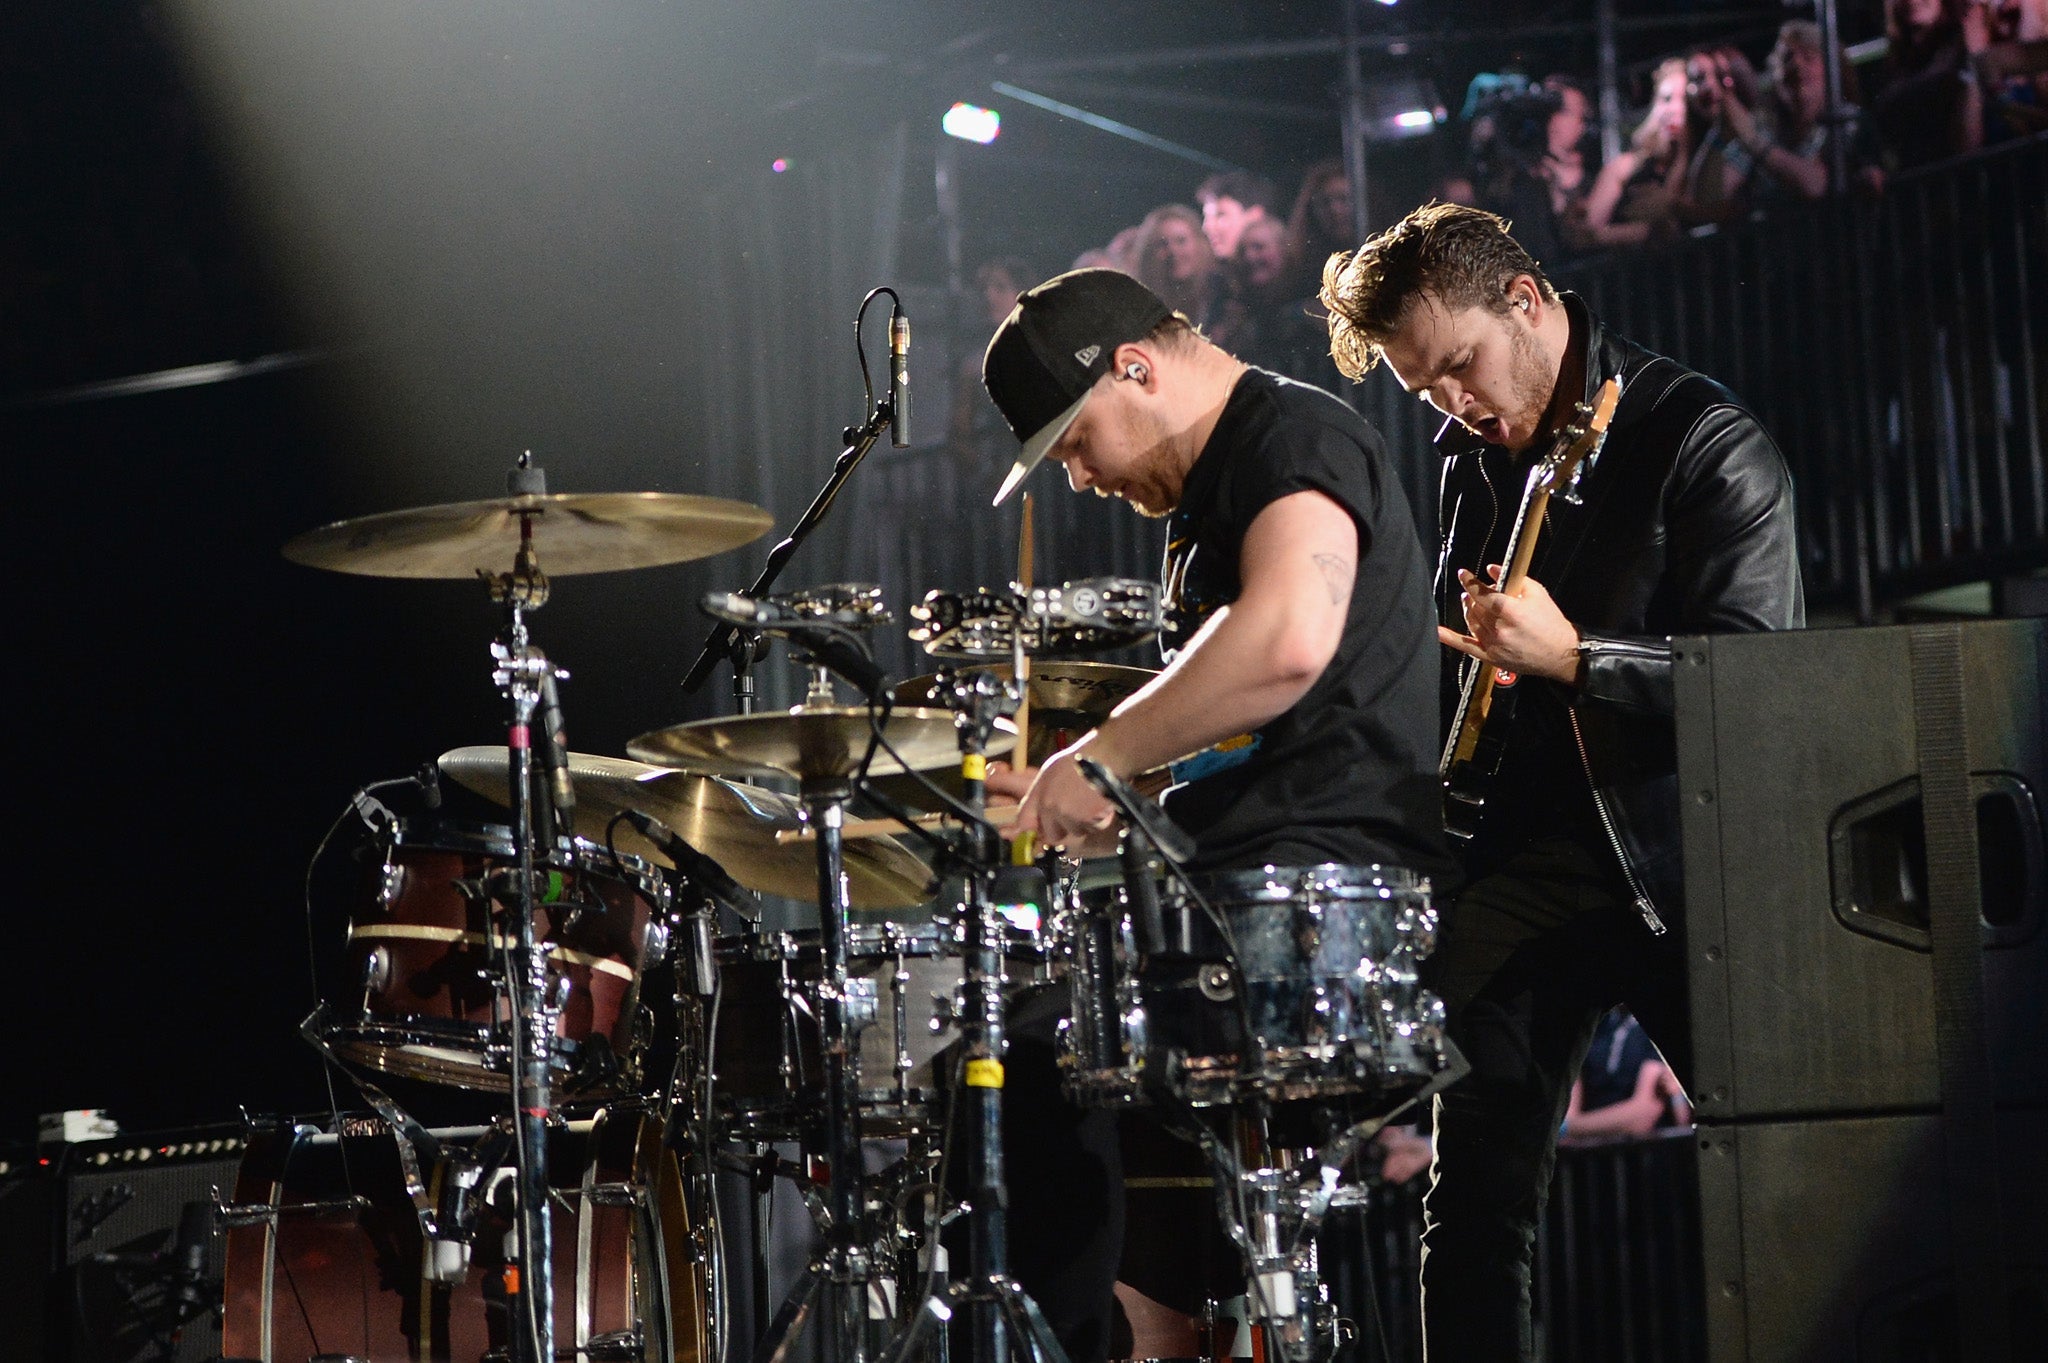 Royal Blood perform on stage at the MTV EMAs